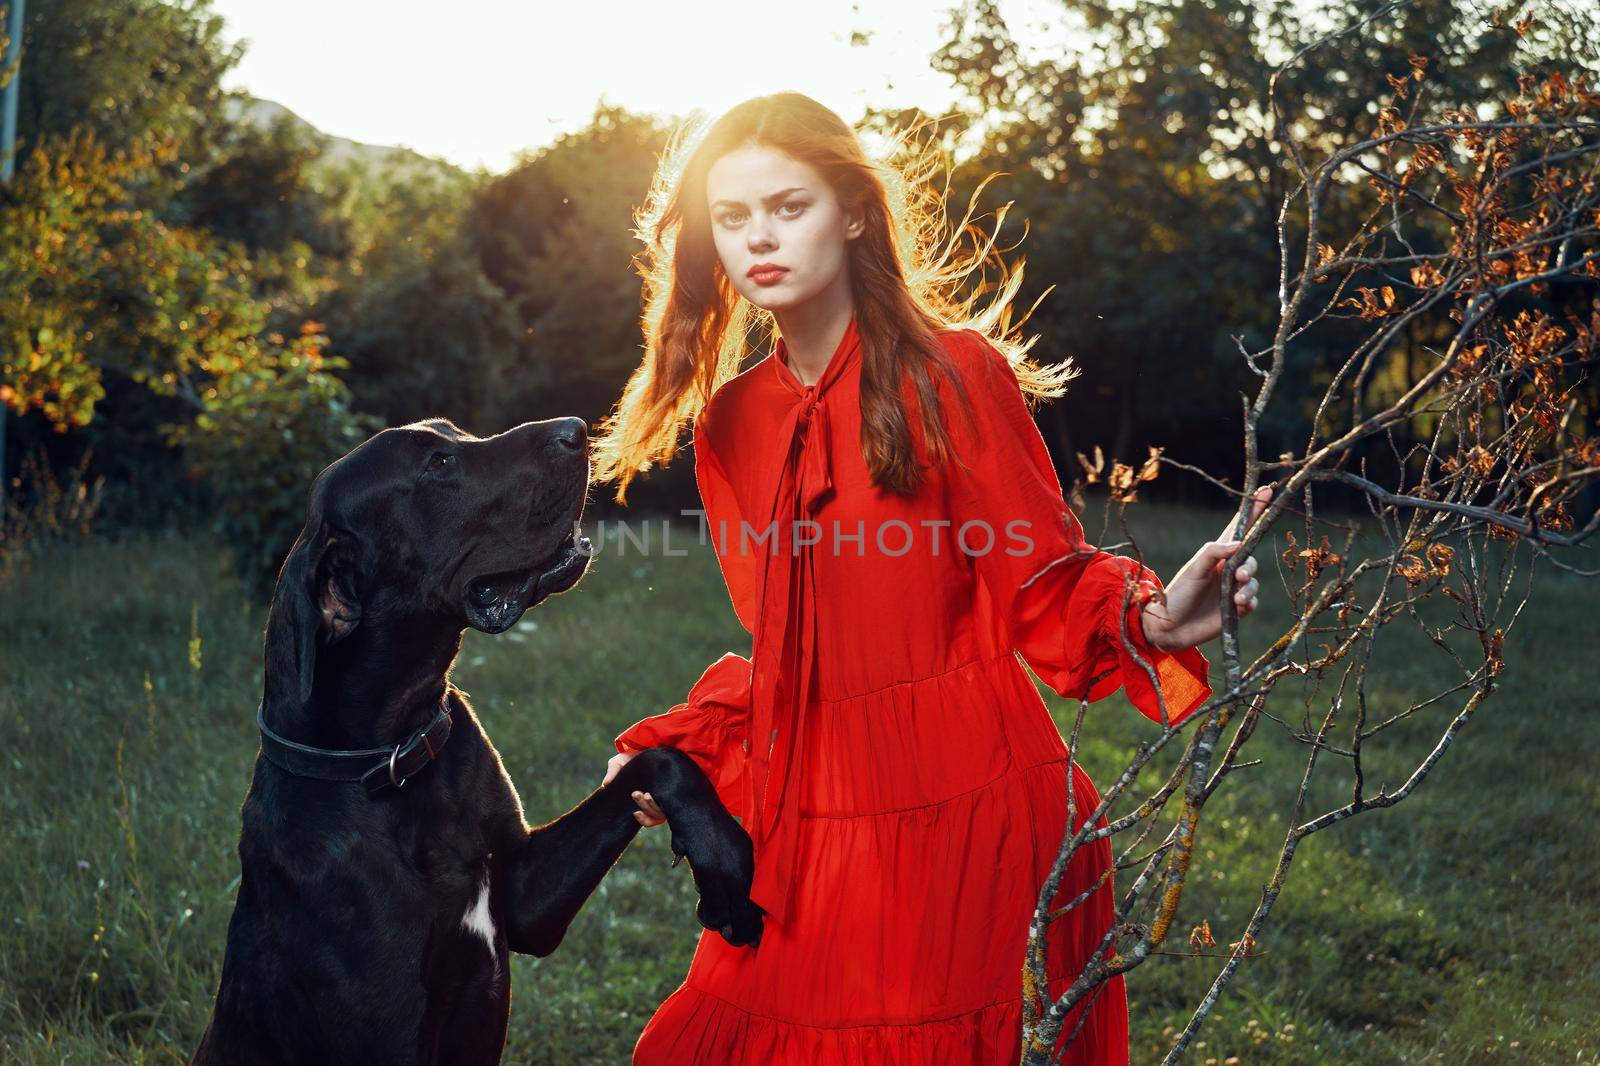 cute woman in red dress playing with dog outdoors friendship. High quality photo